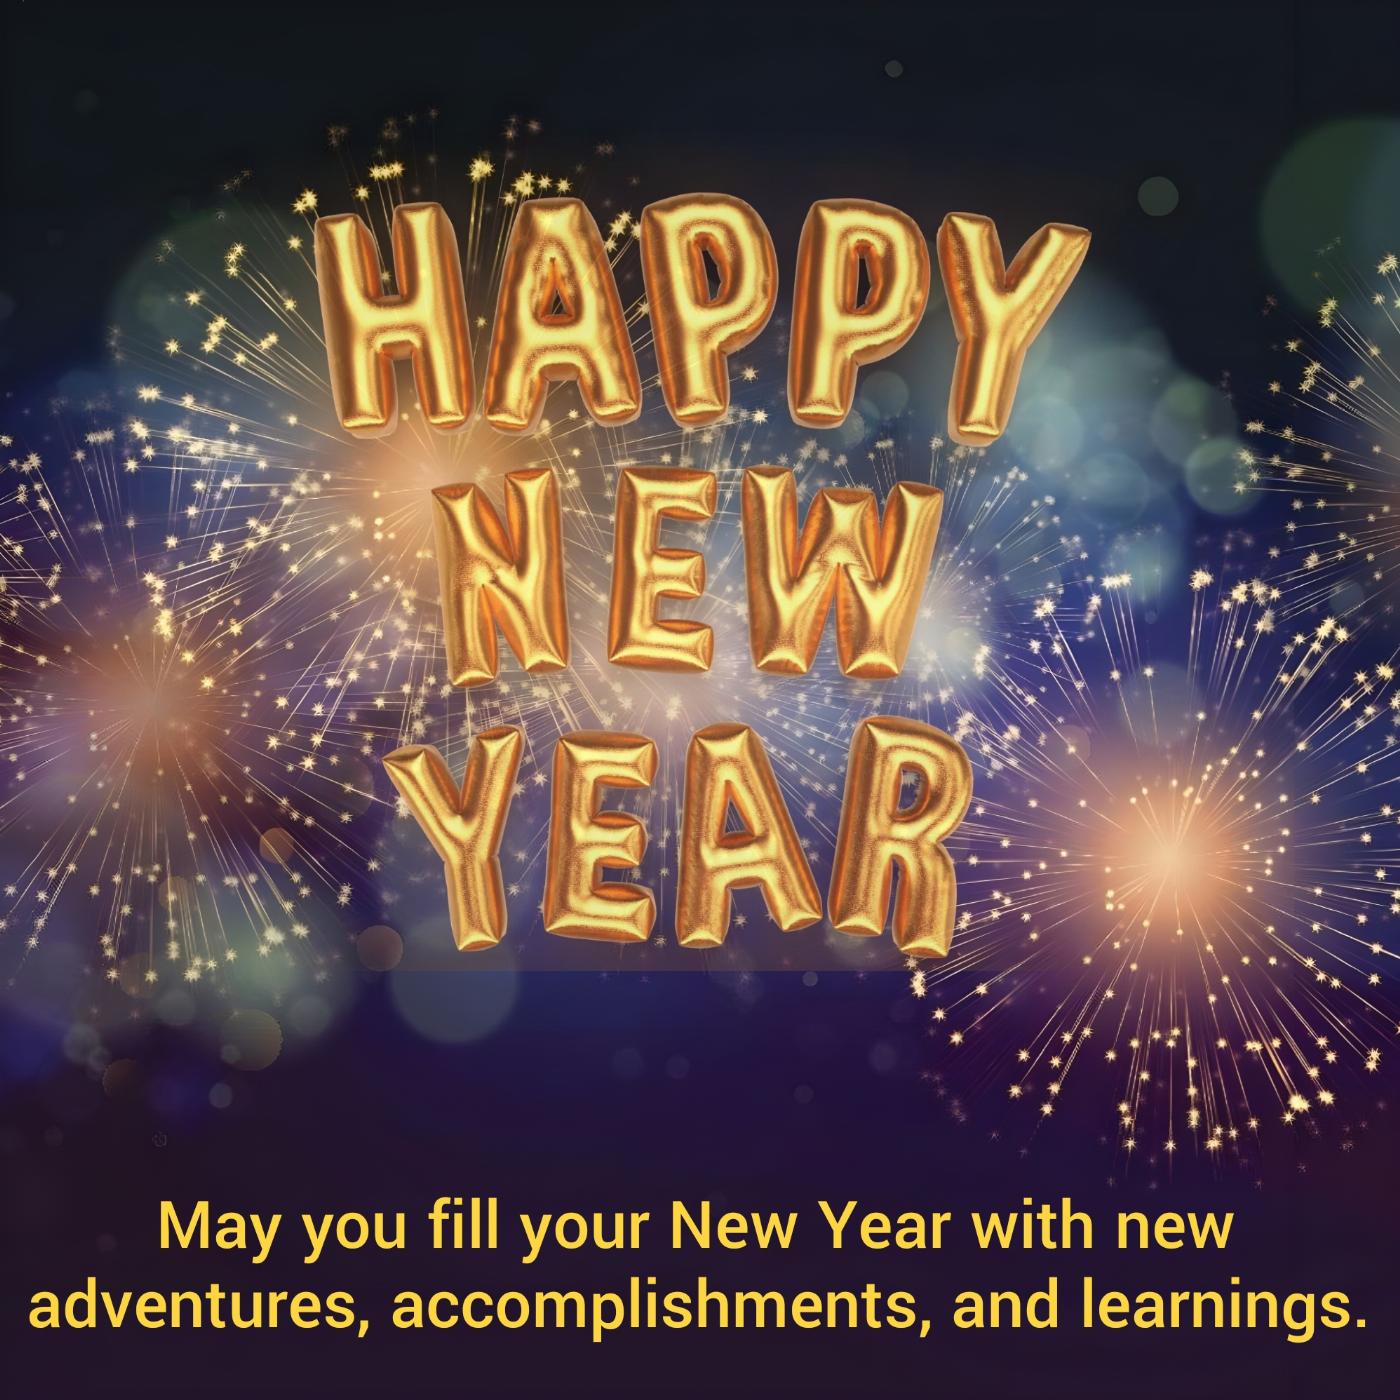 May you fill your New Year with new adventures